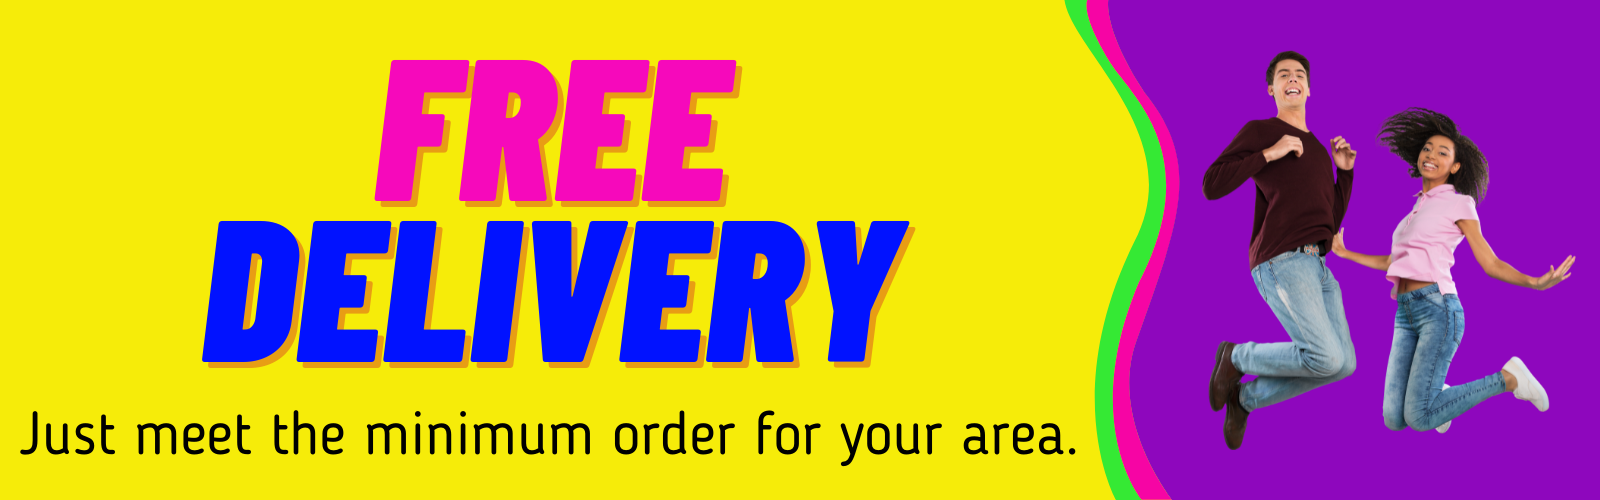 Minimum Order for Hope Mills NC Inflatable Rentals includes FREE DELIVERY